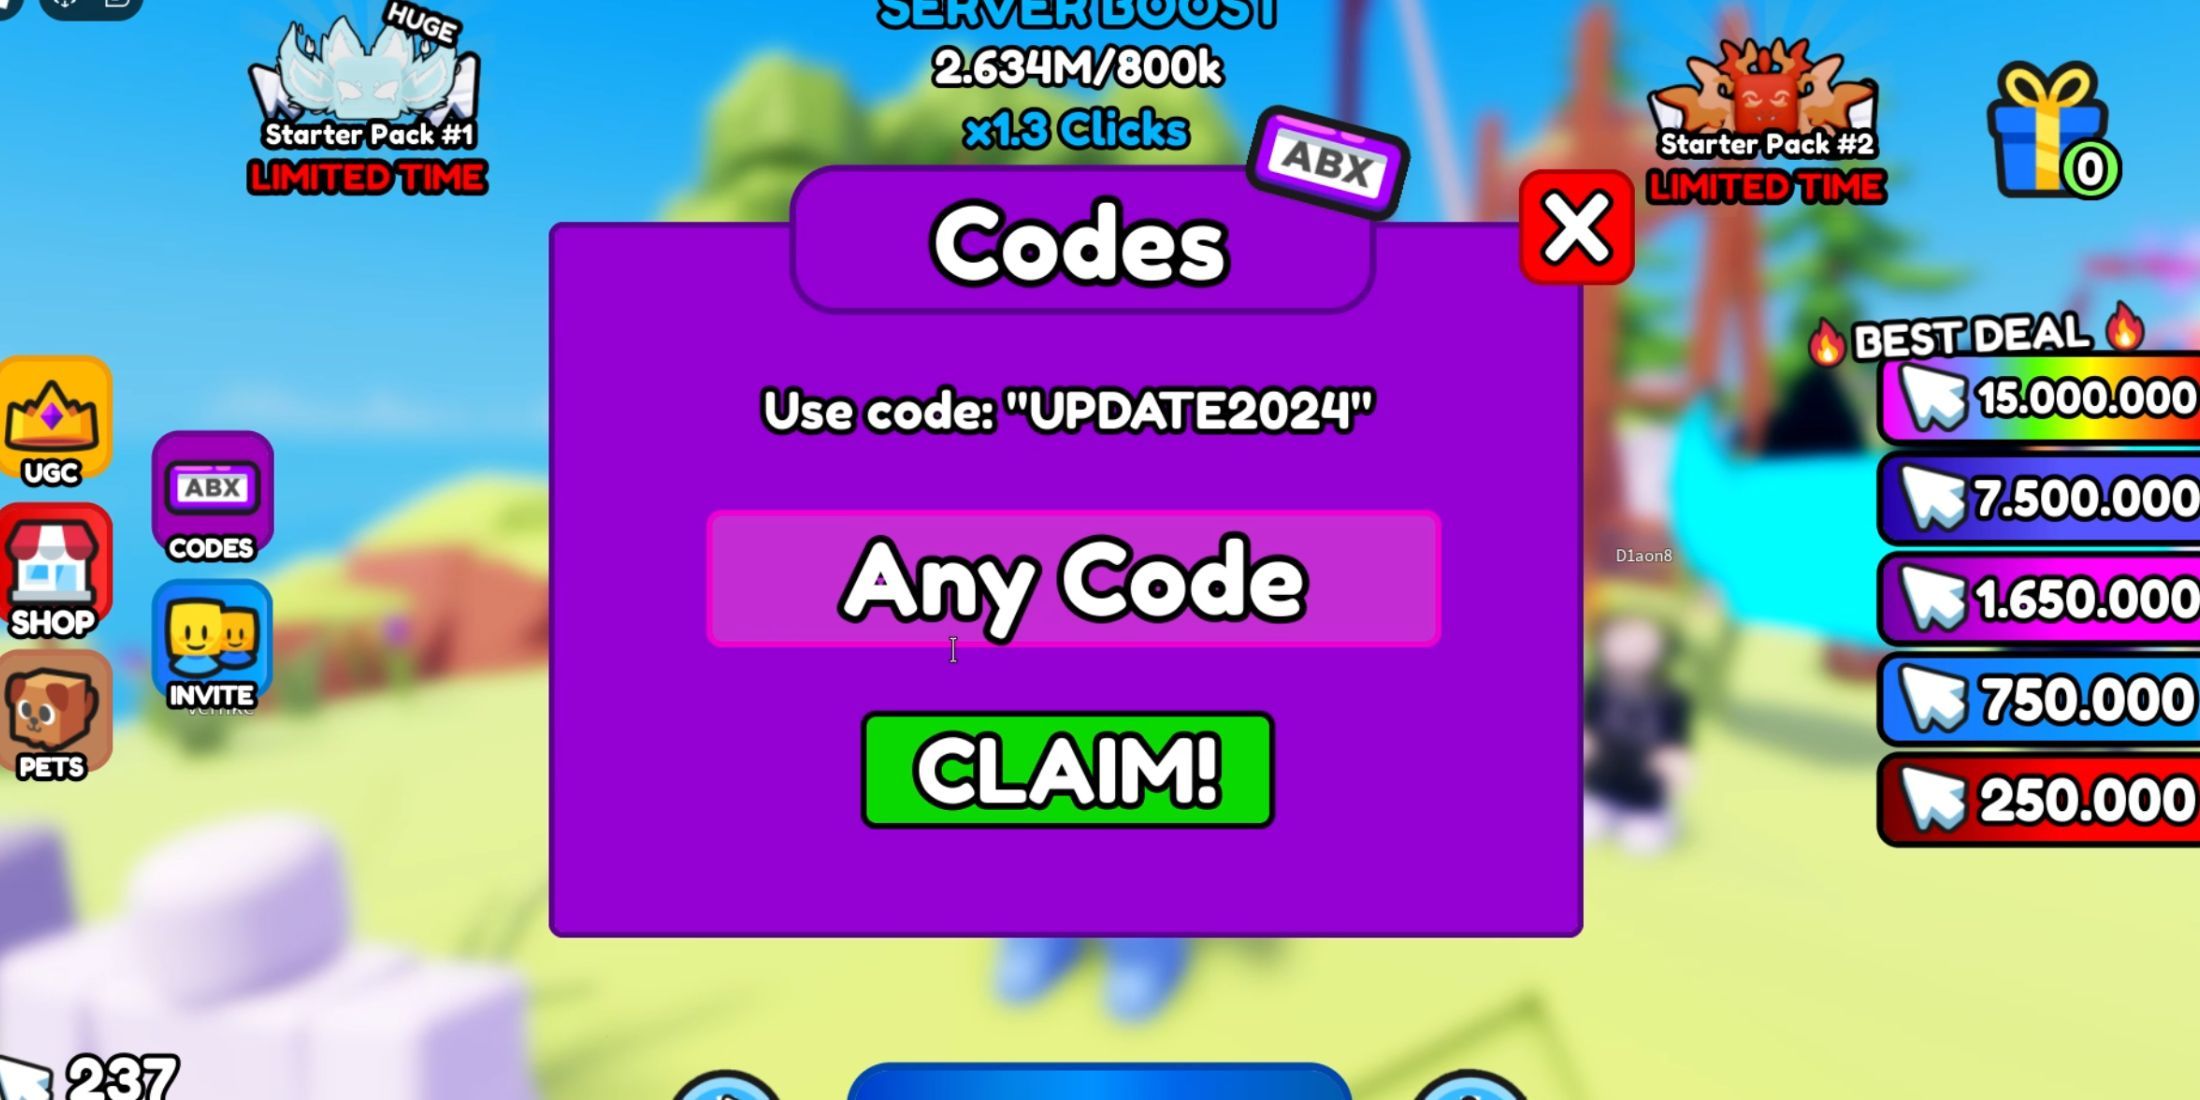 Click for UGC the codes tab